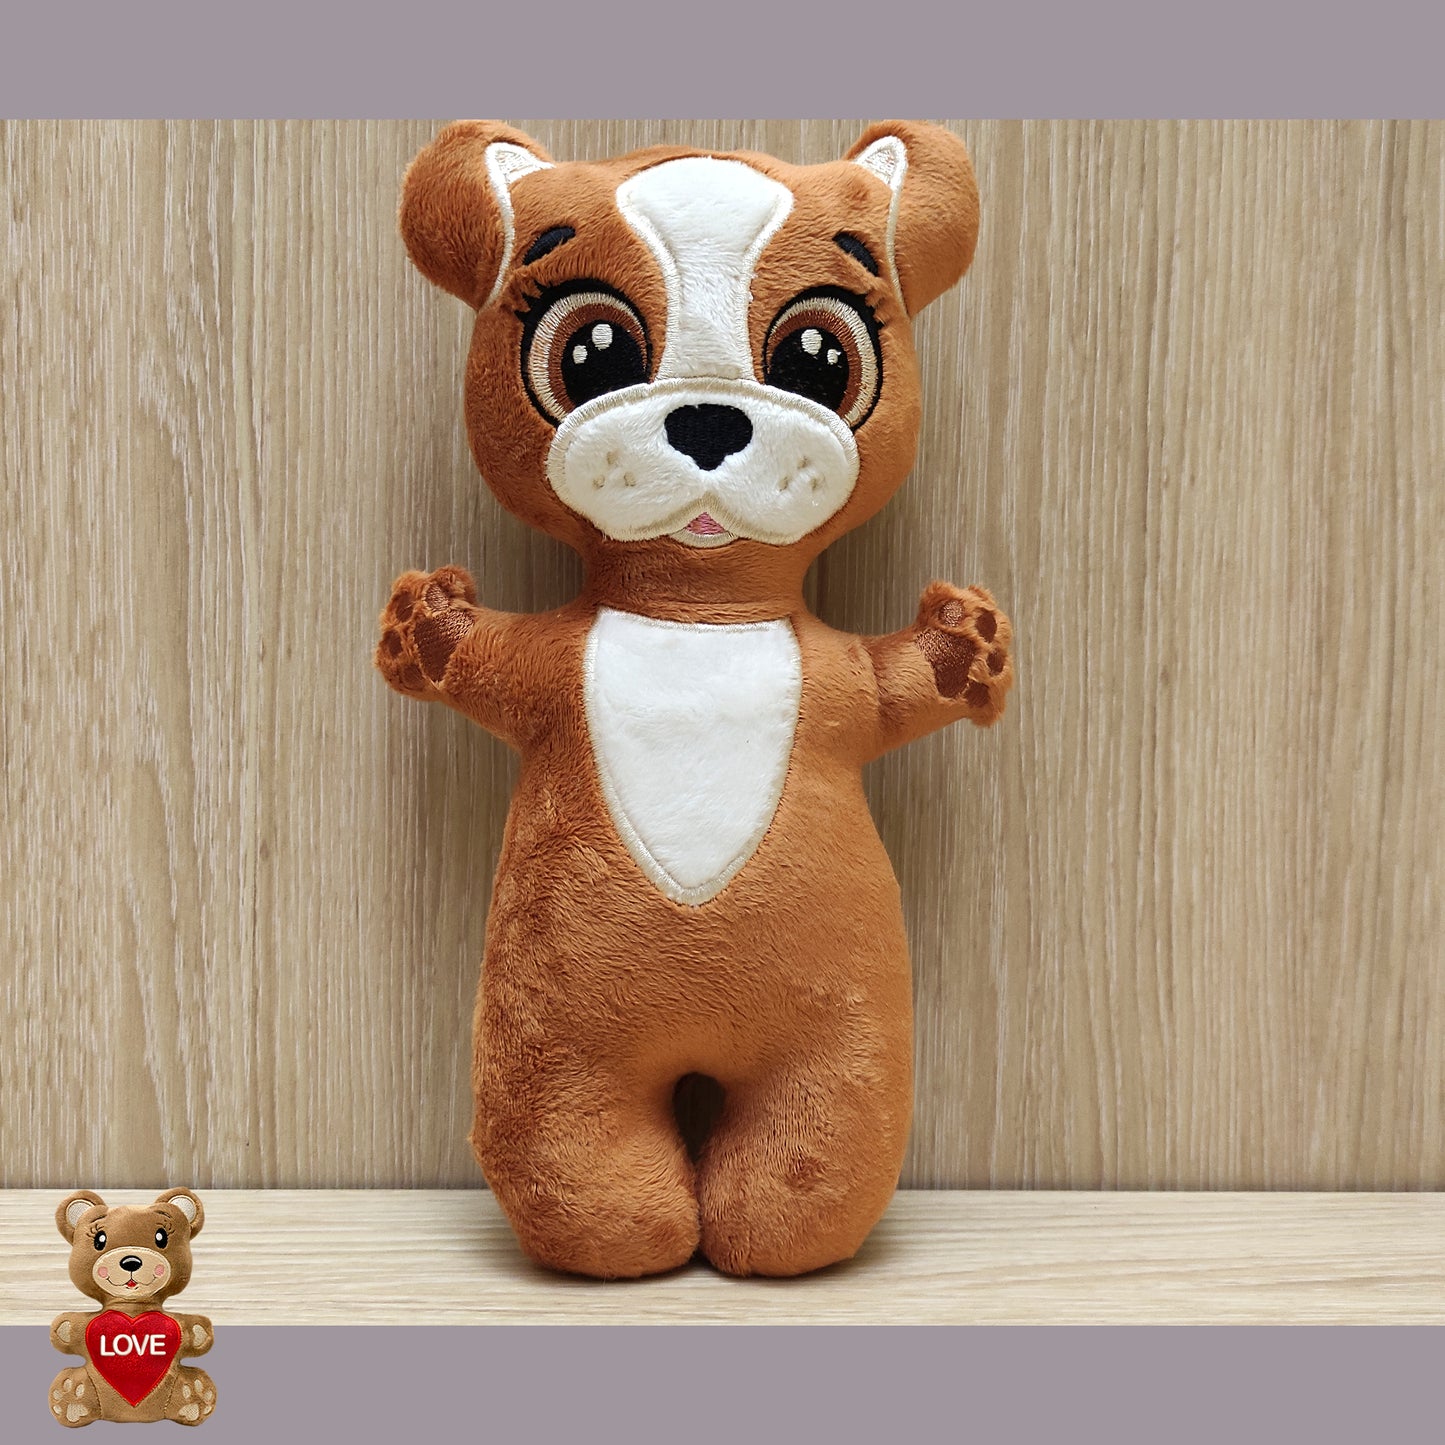 Personalised Cute Dog Stuffed toy ,Super cute personalised soft plush toy, Personalised Gift, Unique Personalized Birthday Gifts , Custom Gifts For Children